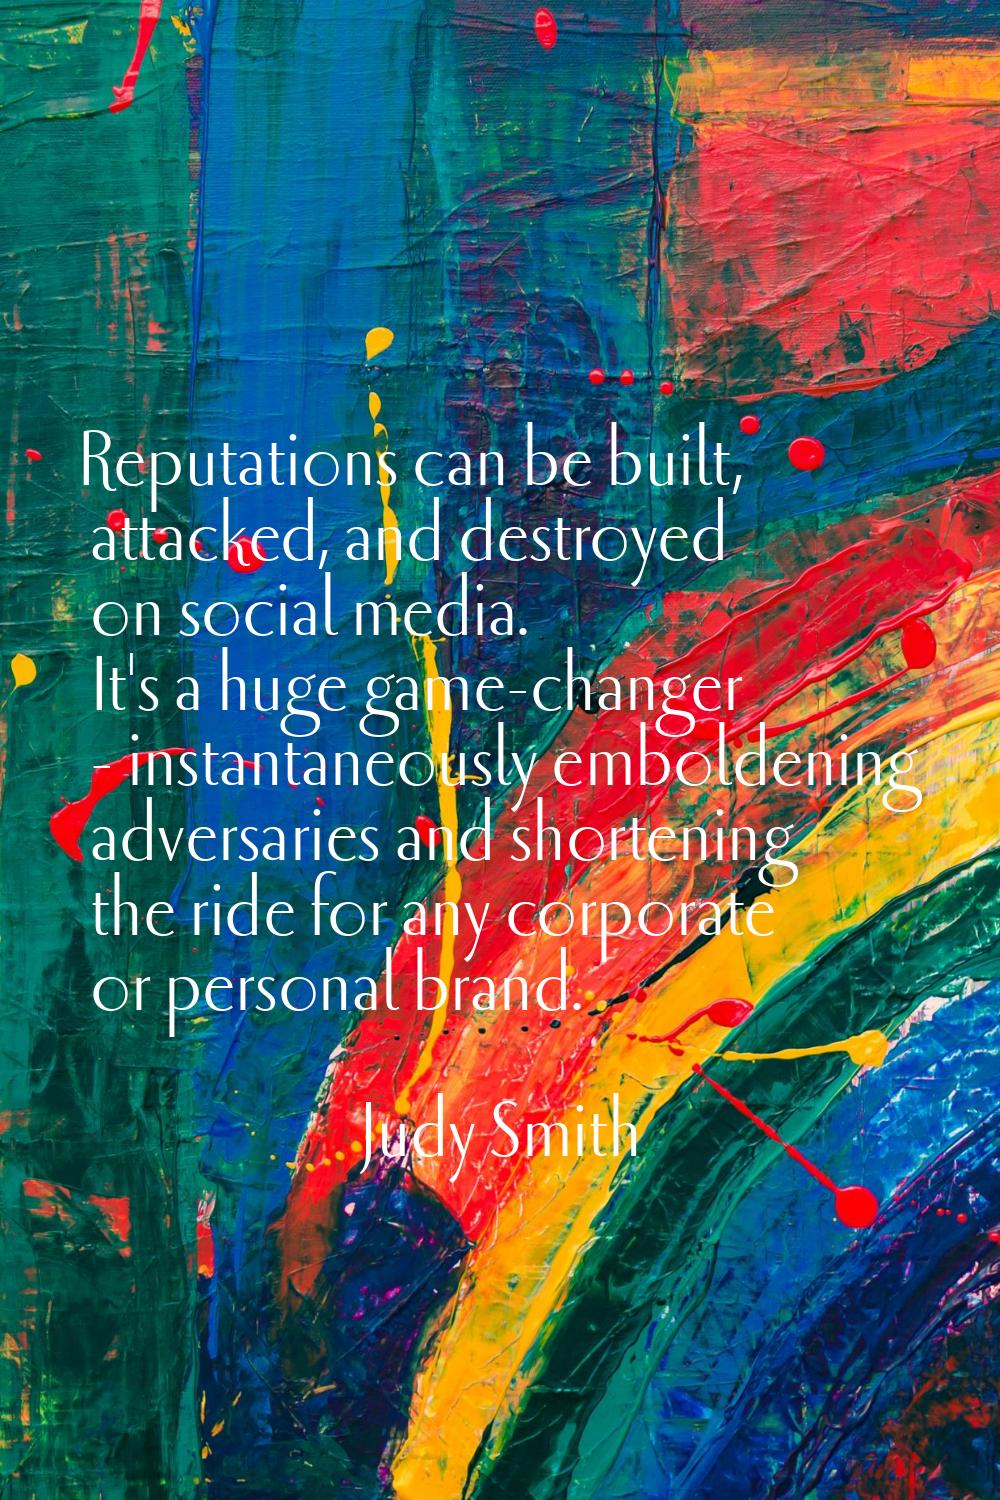 Reputations can be built, attacked, and destroyed on social media. It's a huge game-changer - insta